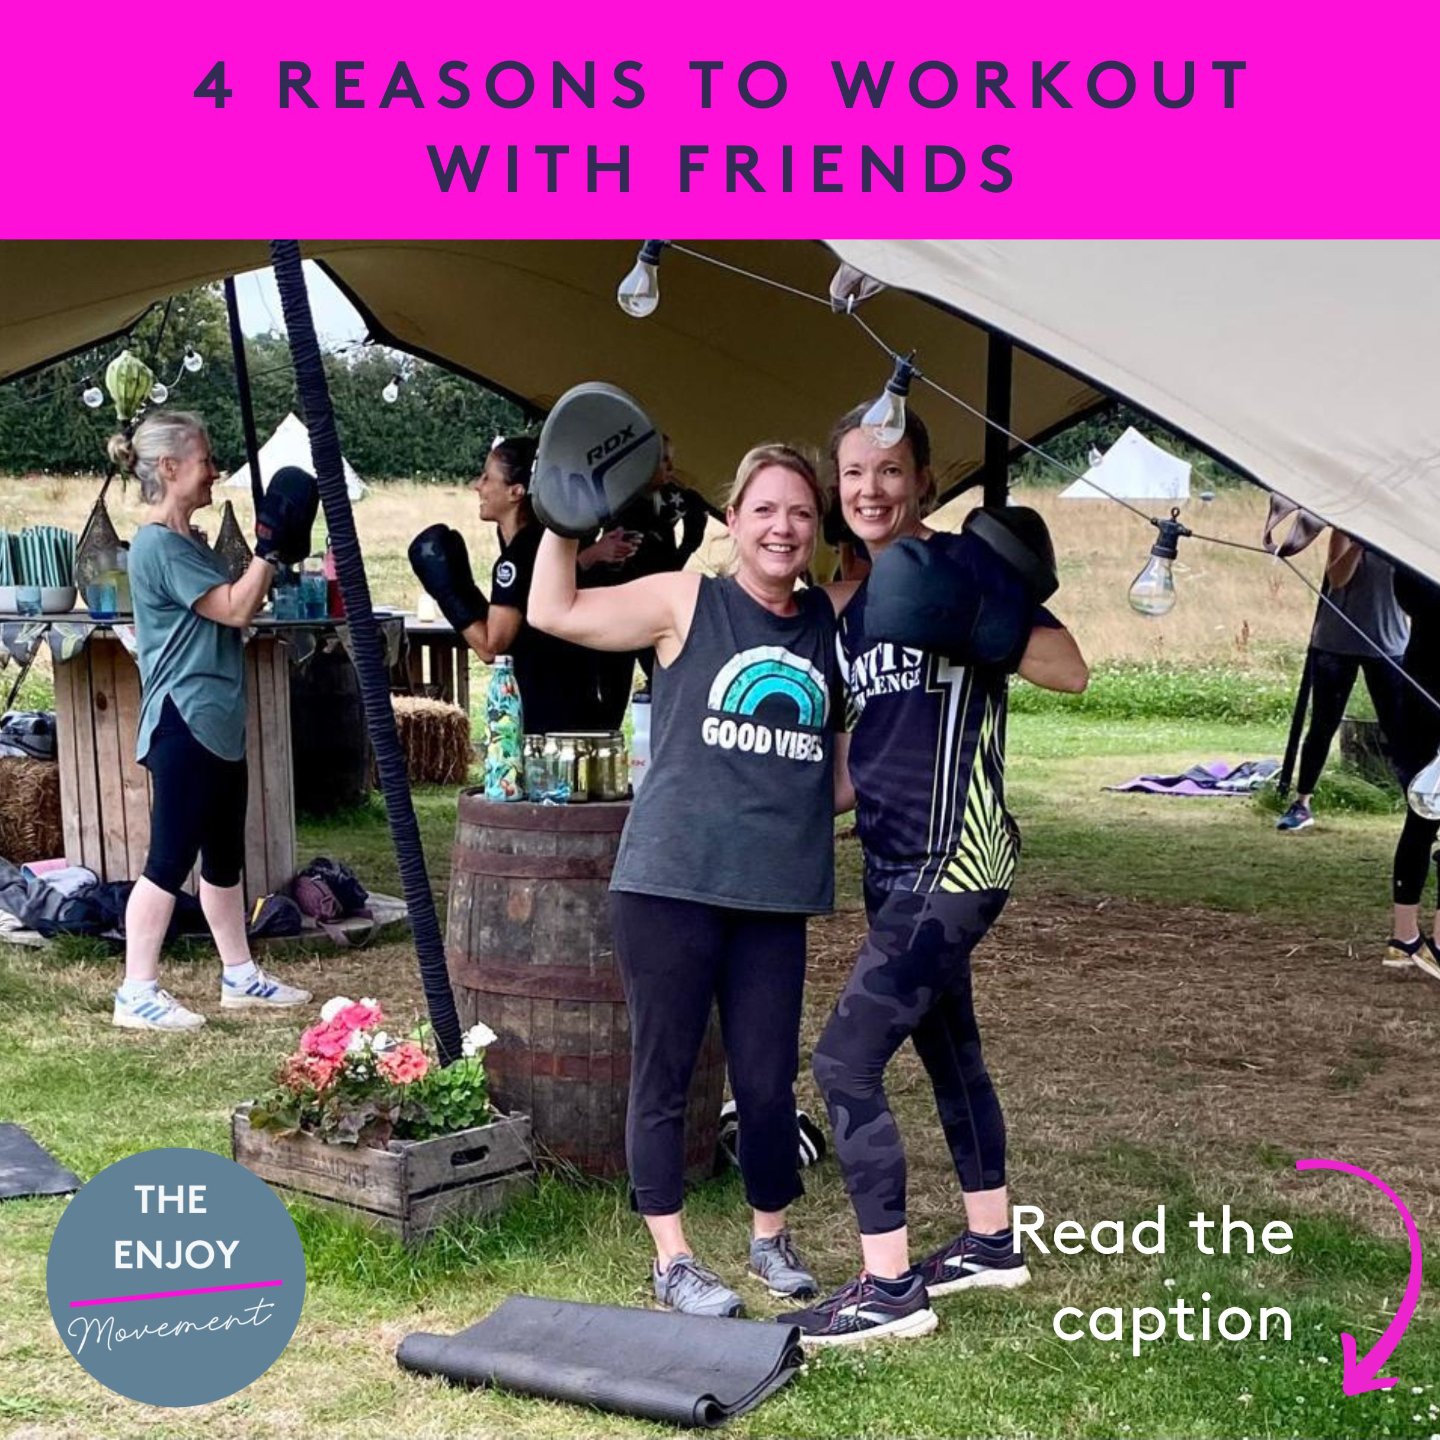 Who do you like to workout with?

There&rsquo;s plenty of evidence that working out with friends has benefits:

👯&zwj;♂️ Accountability
If you&rsquo;re meeting a friend at a workout or car sharing to get there, you&rsquo;re much more likely to feel 